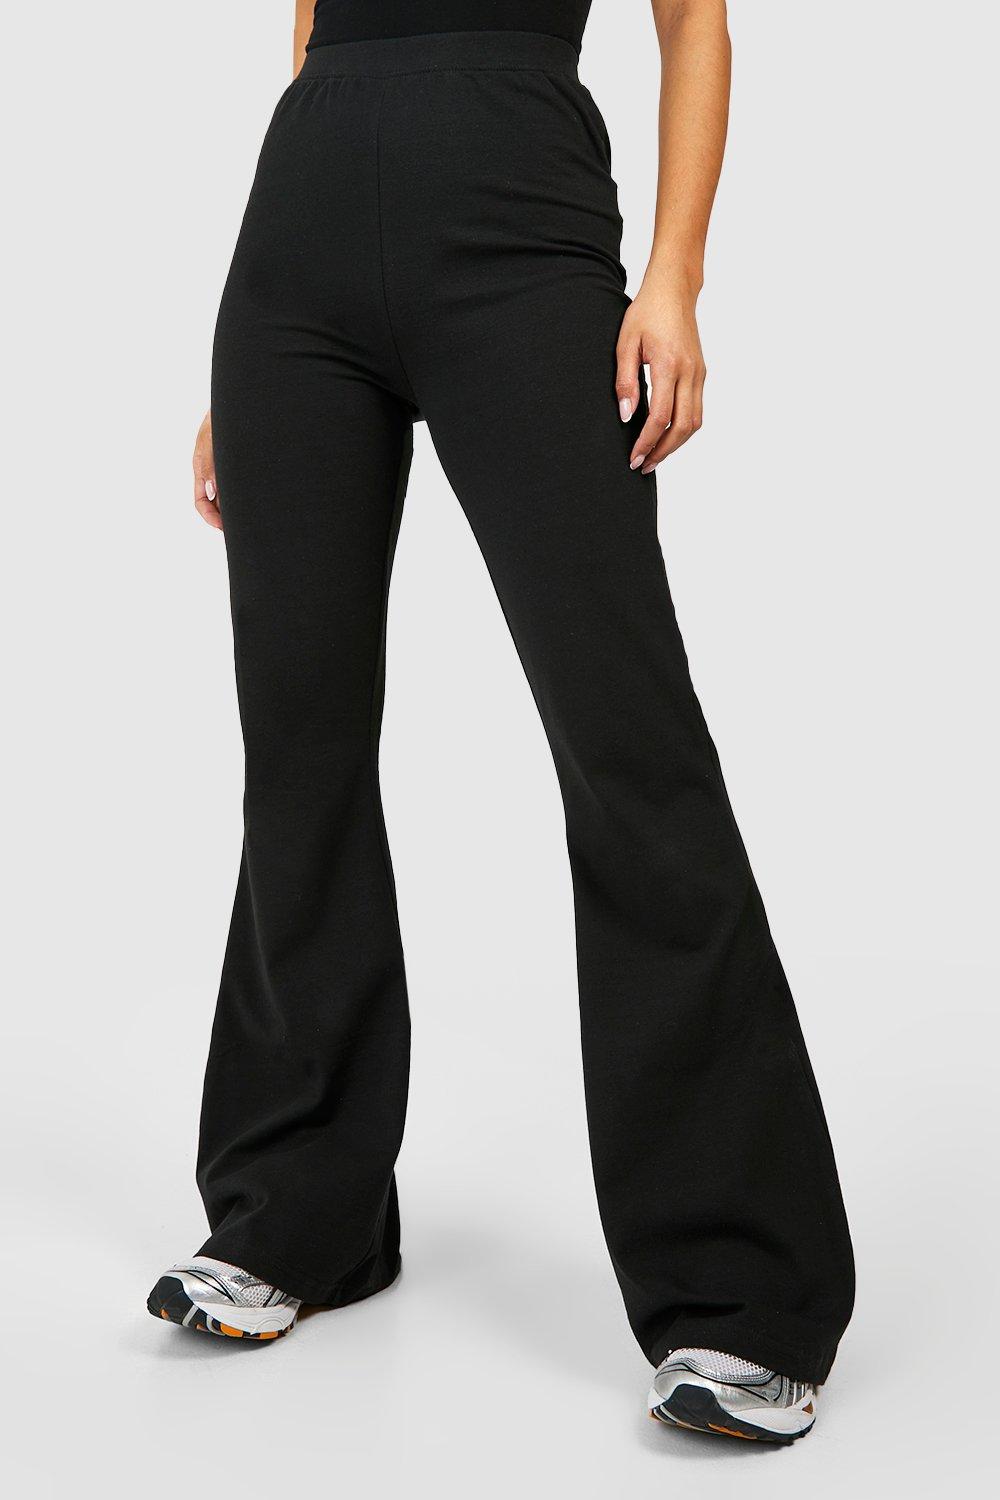 Women's Cotton Black High Waisted Flared Trousers